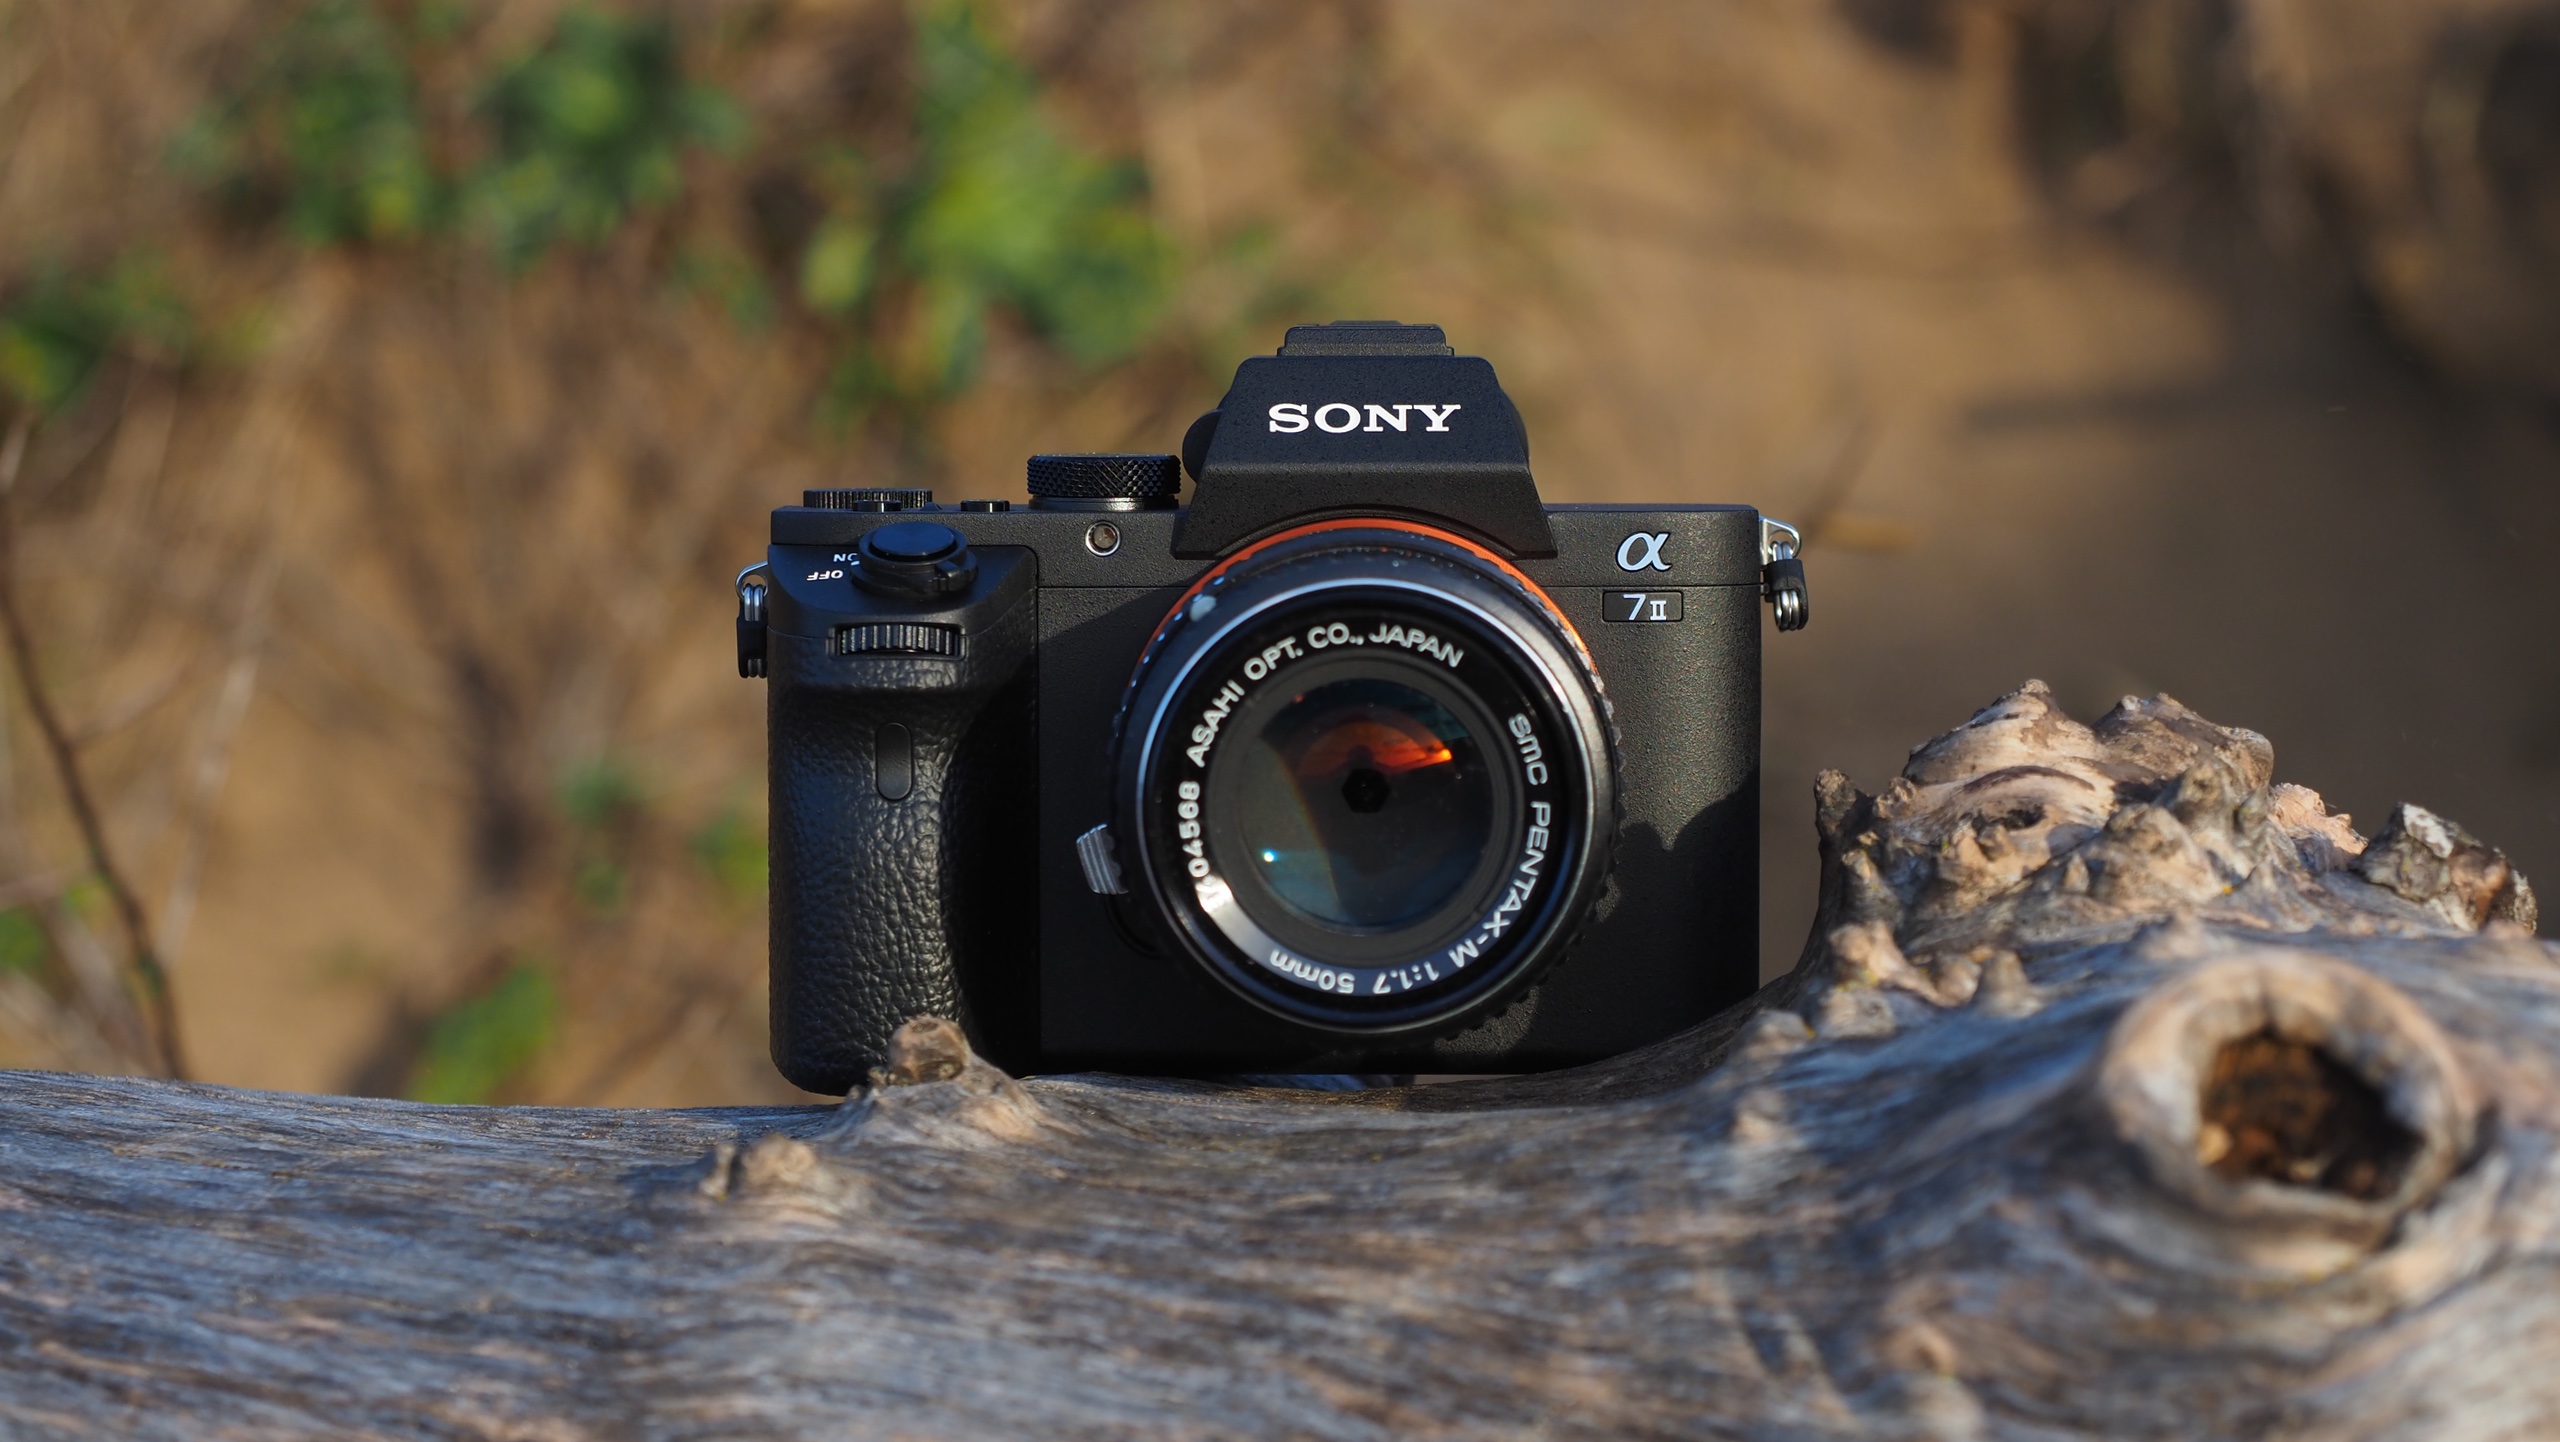 Why You're Probably Going to Buy the Sony a7S III